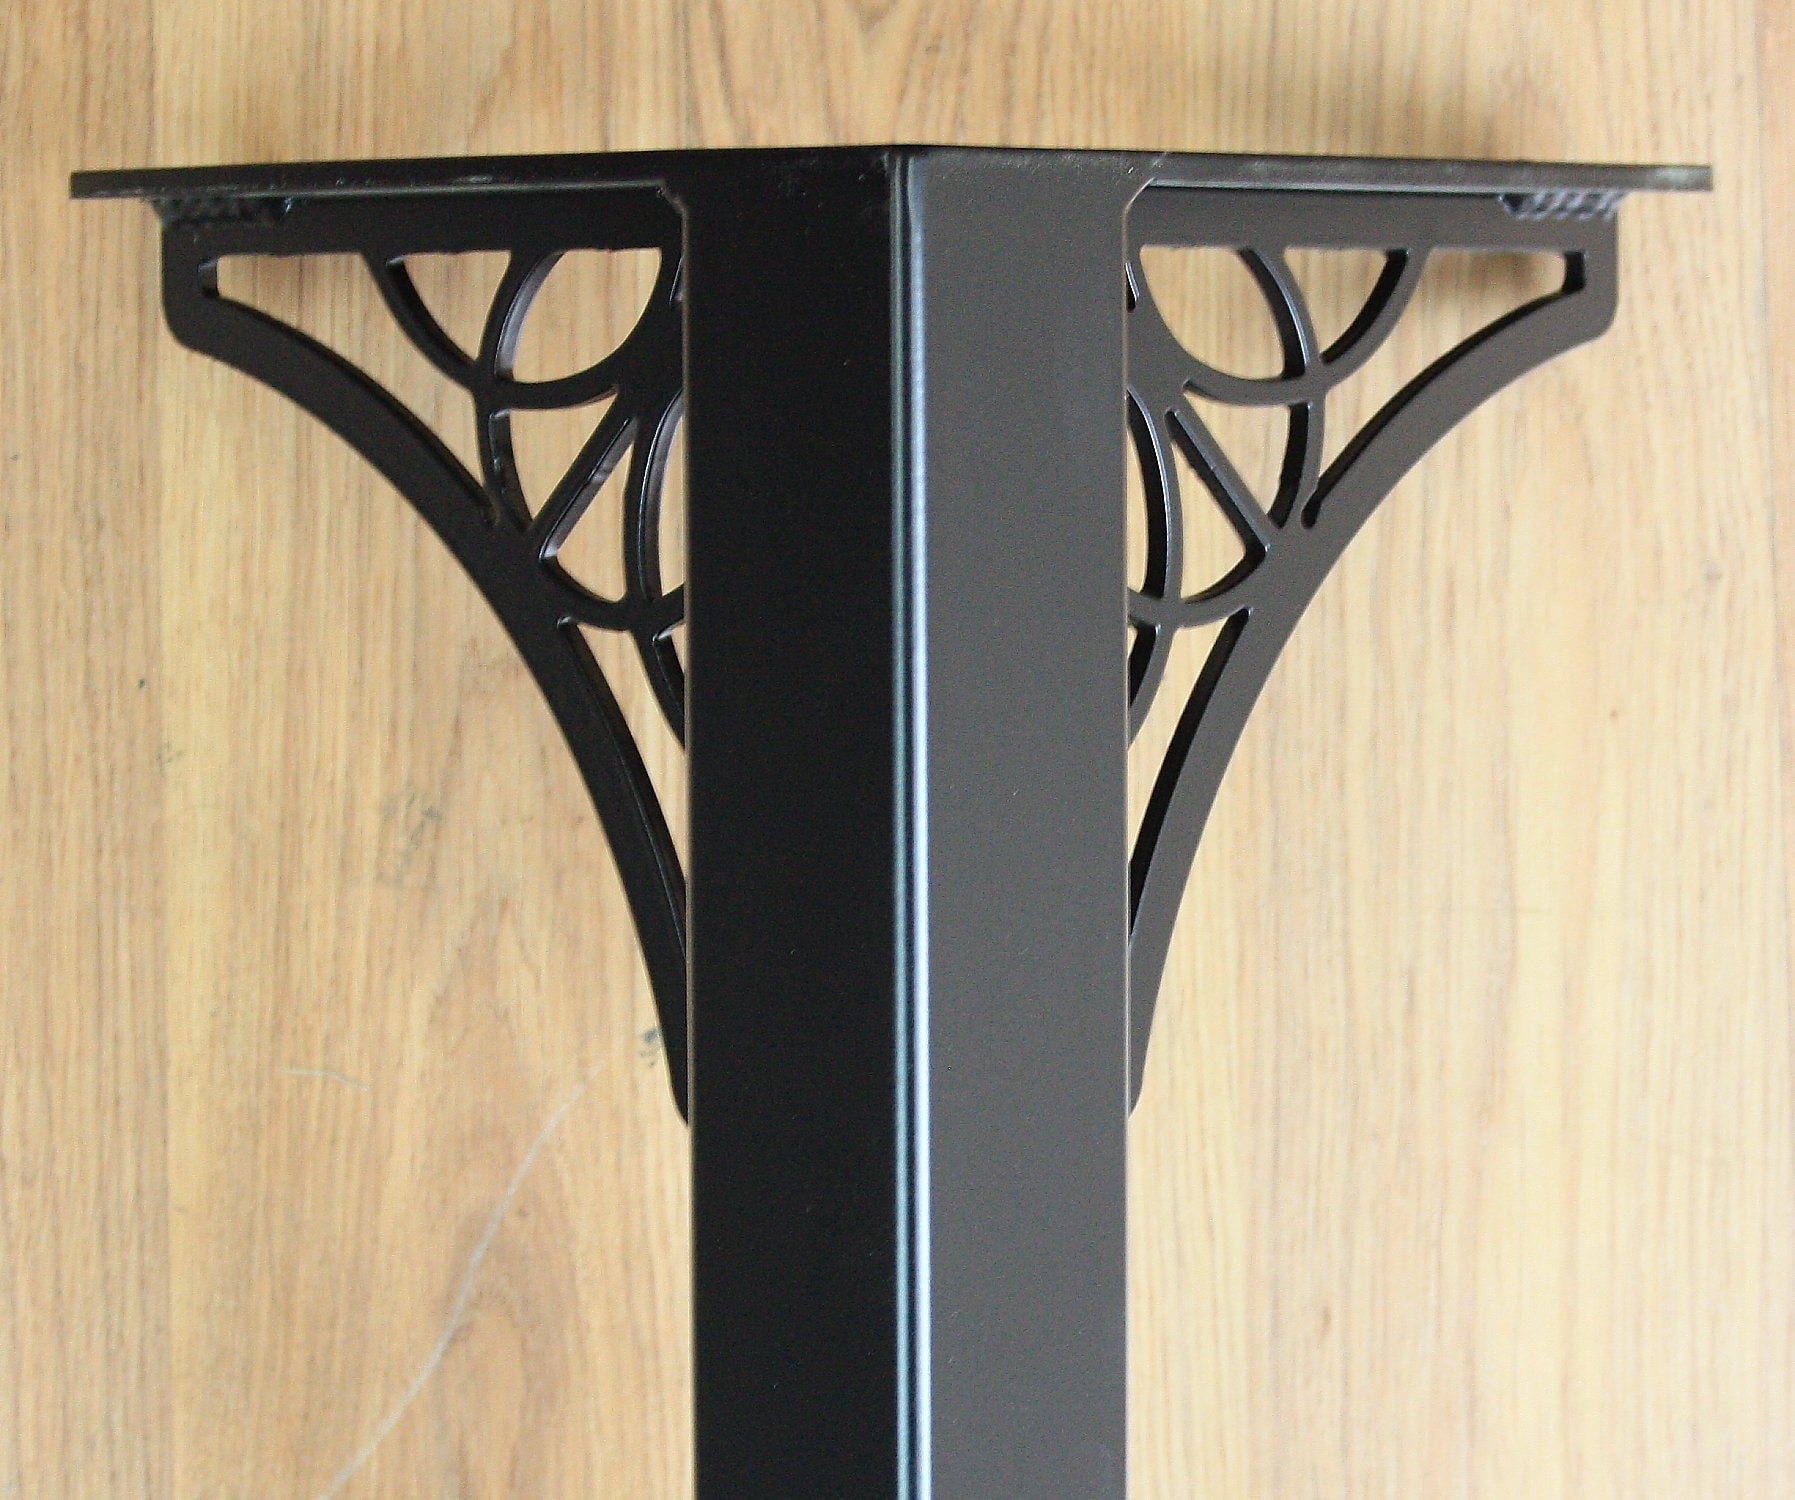 Steel Table Legs With Decorative Metal Scroll Gussets Set of 4 - Etsy